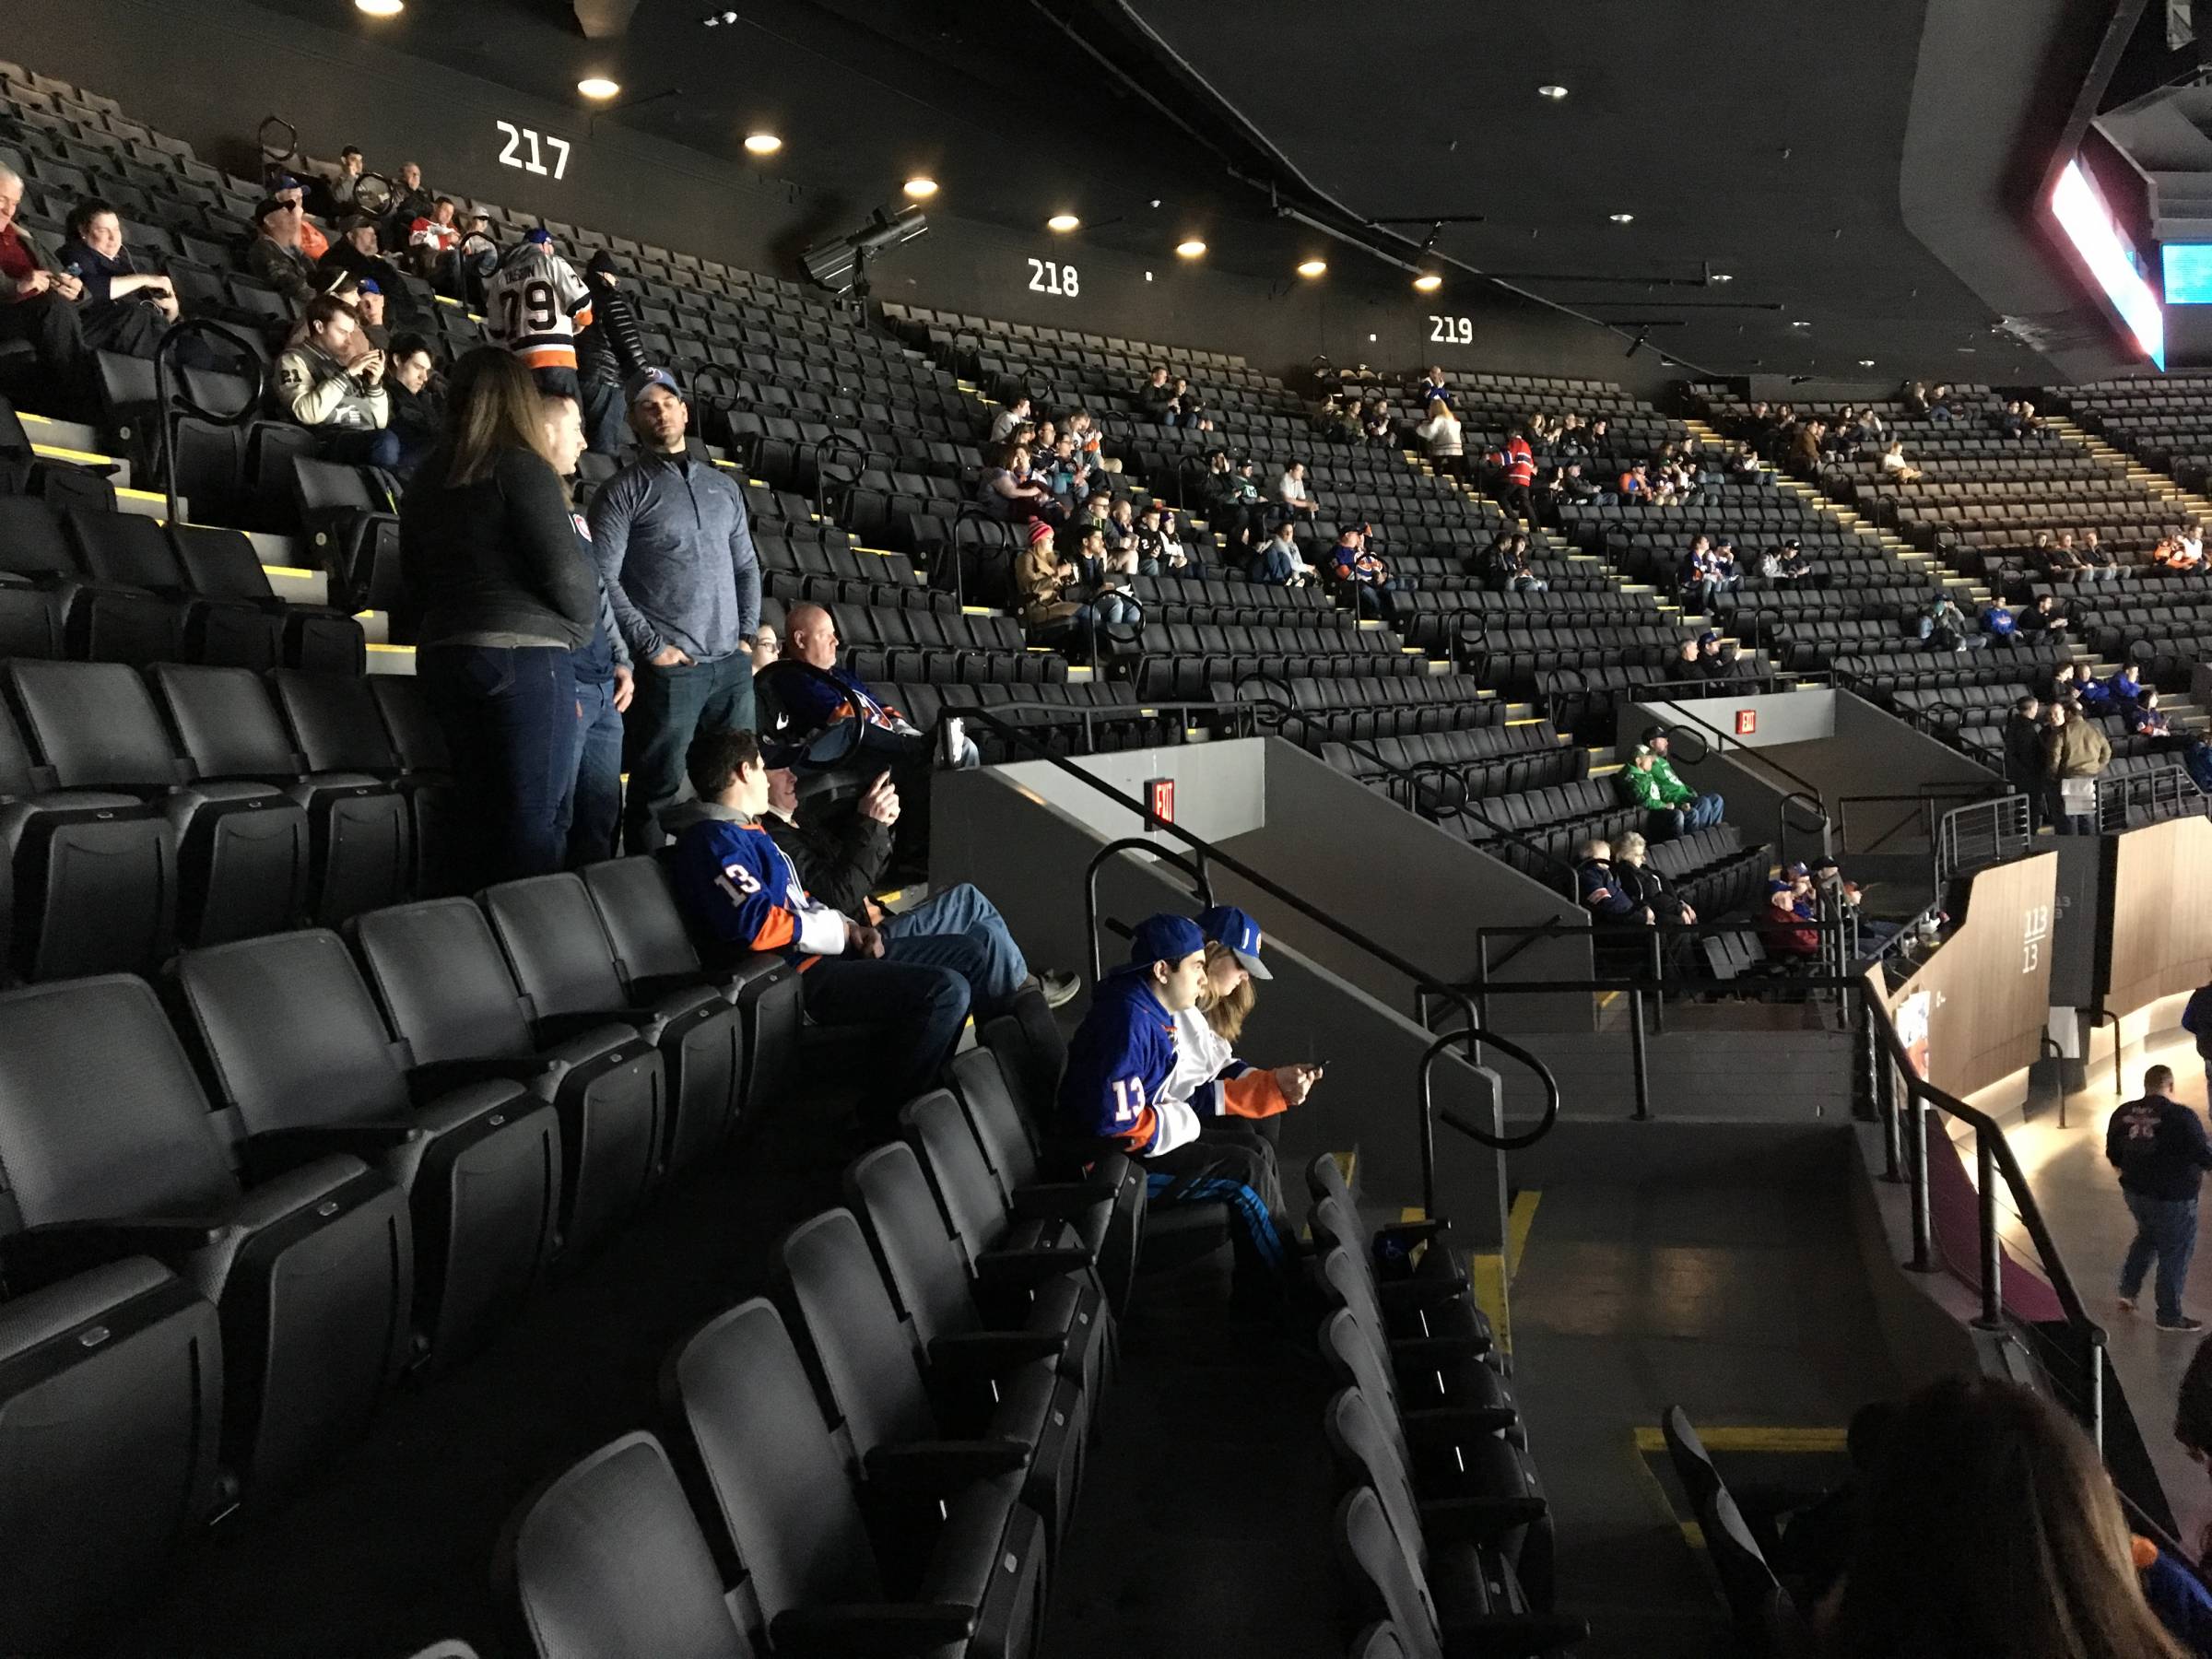 View of seats in section 216 at Nassau Coliseum